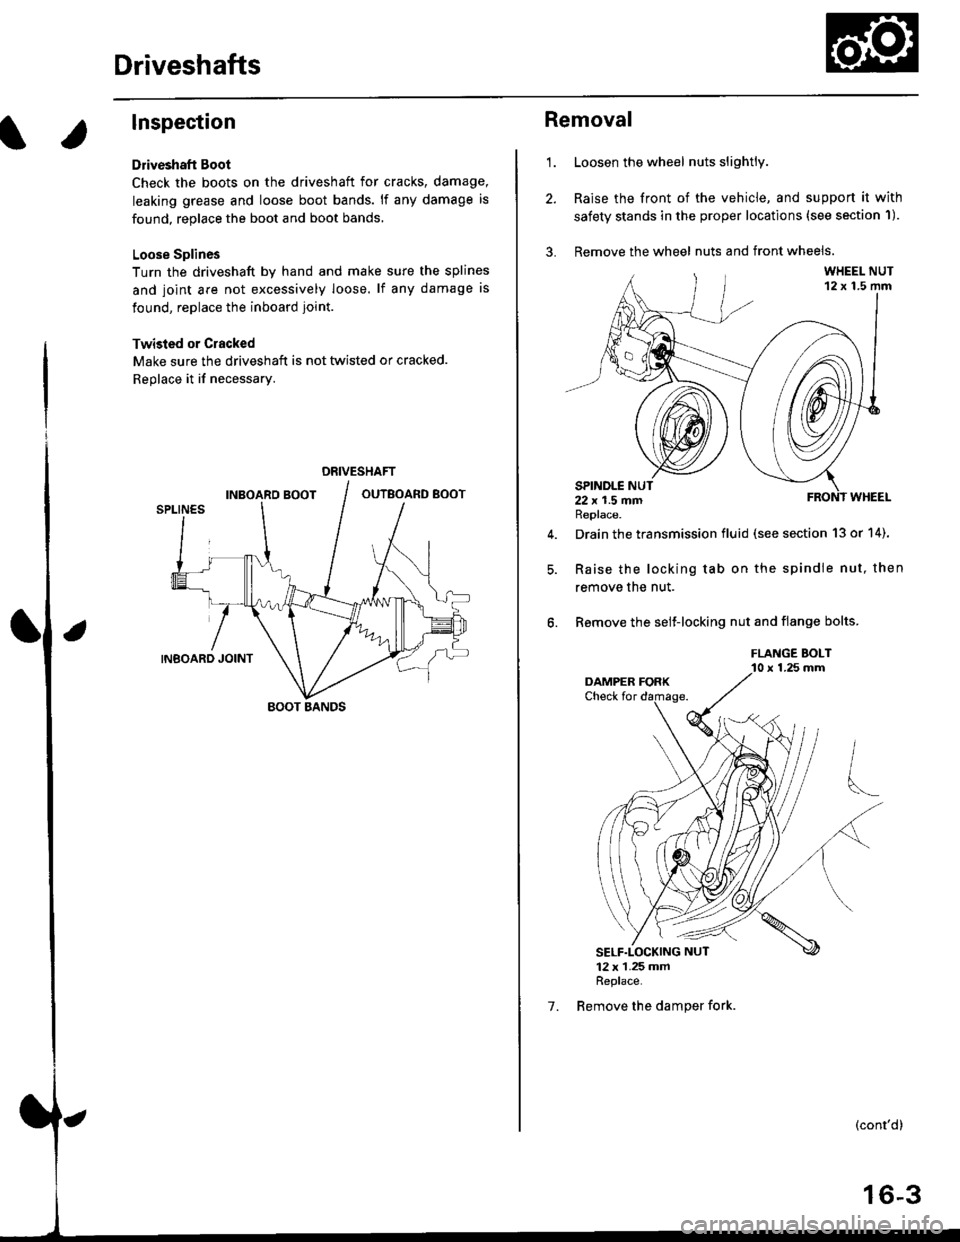 HONDA CIVIC 1996 6.G User Guide Driveshafts
Inspection
Driveshaft Boot
Check the boots on the driveshaft for cracks, damage,
leaking grease and loose boot bands. lf any damage is
found, replace the boot and boot bands,
Loose Splines